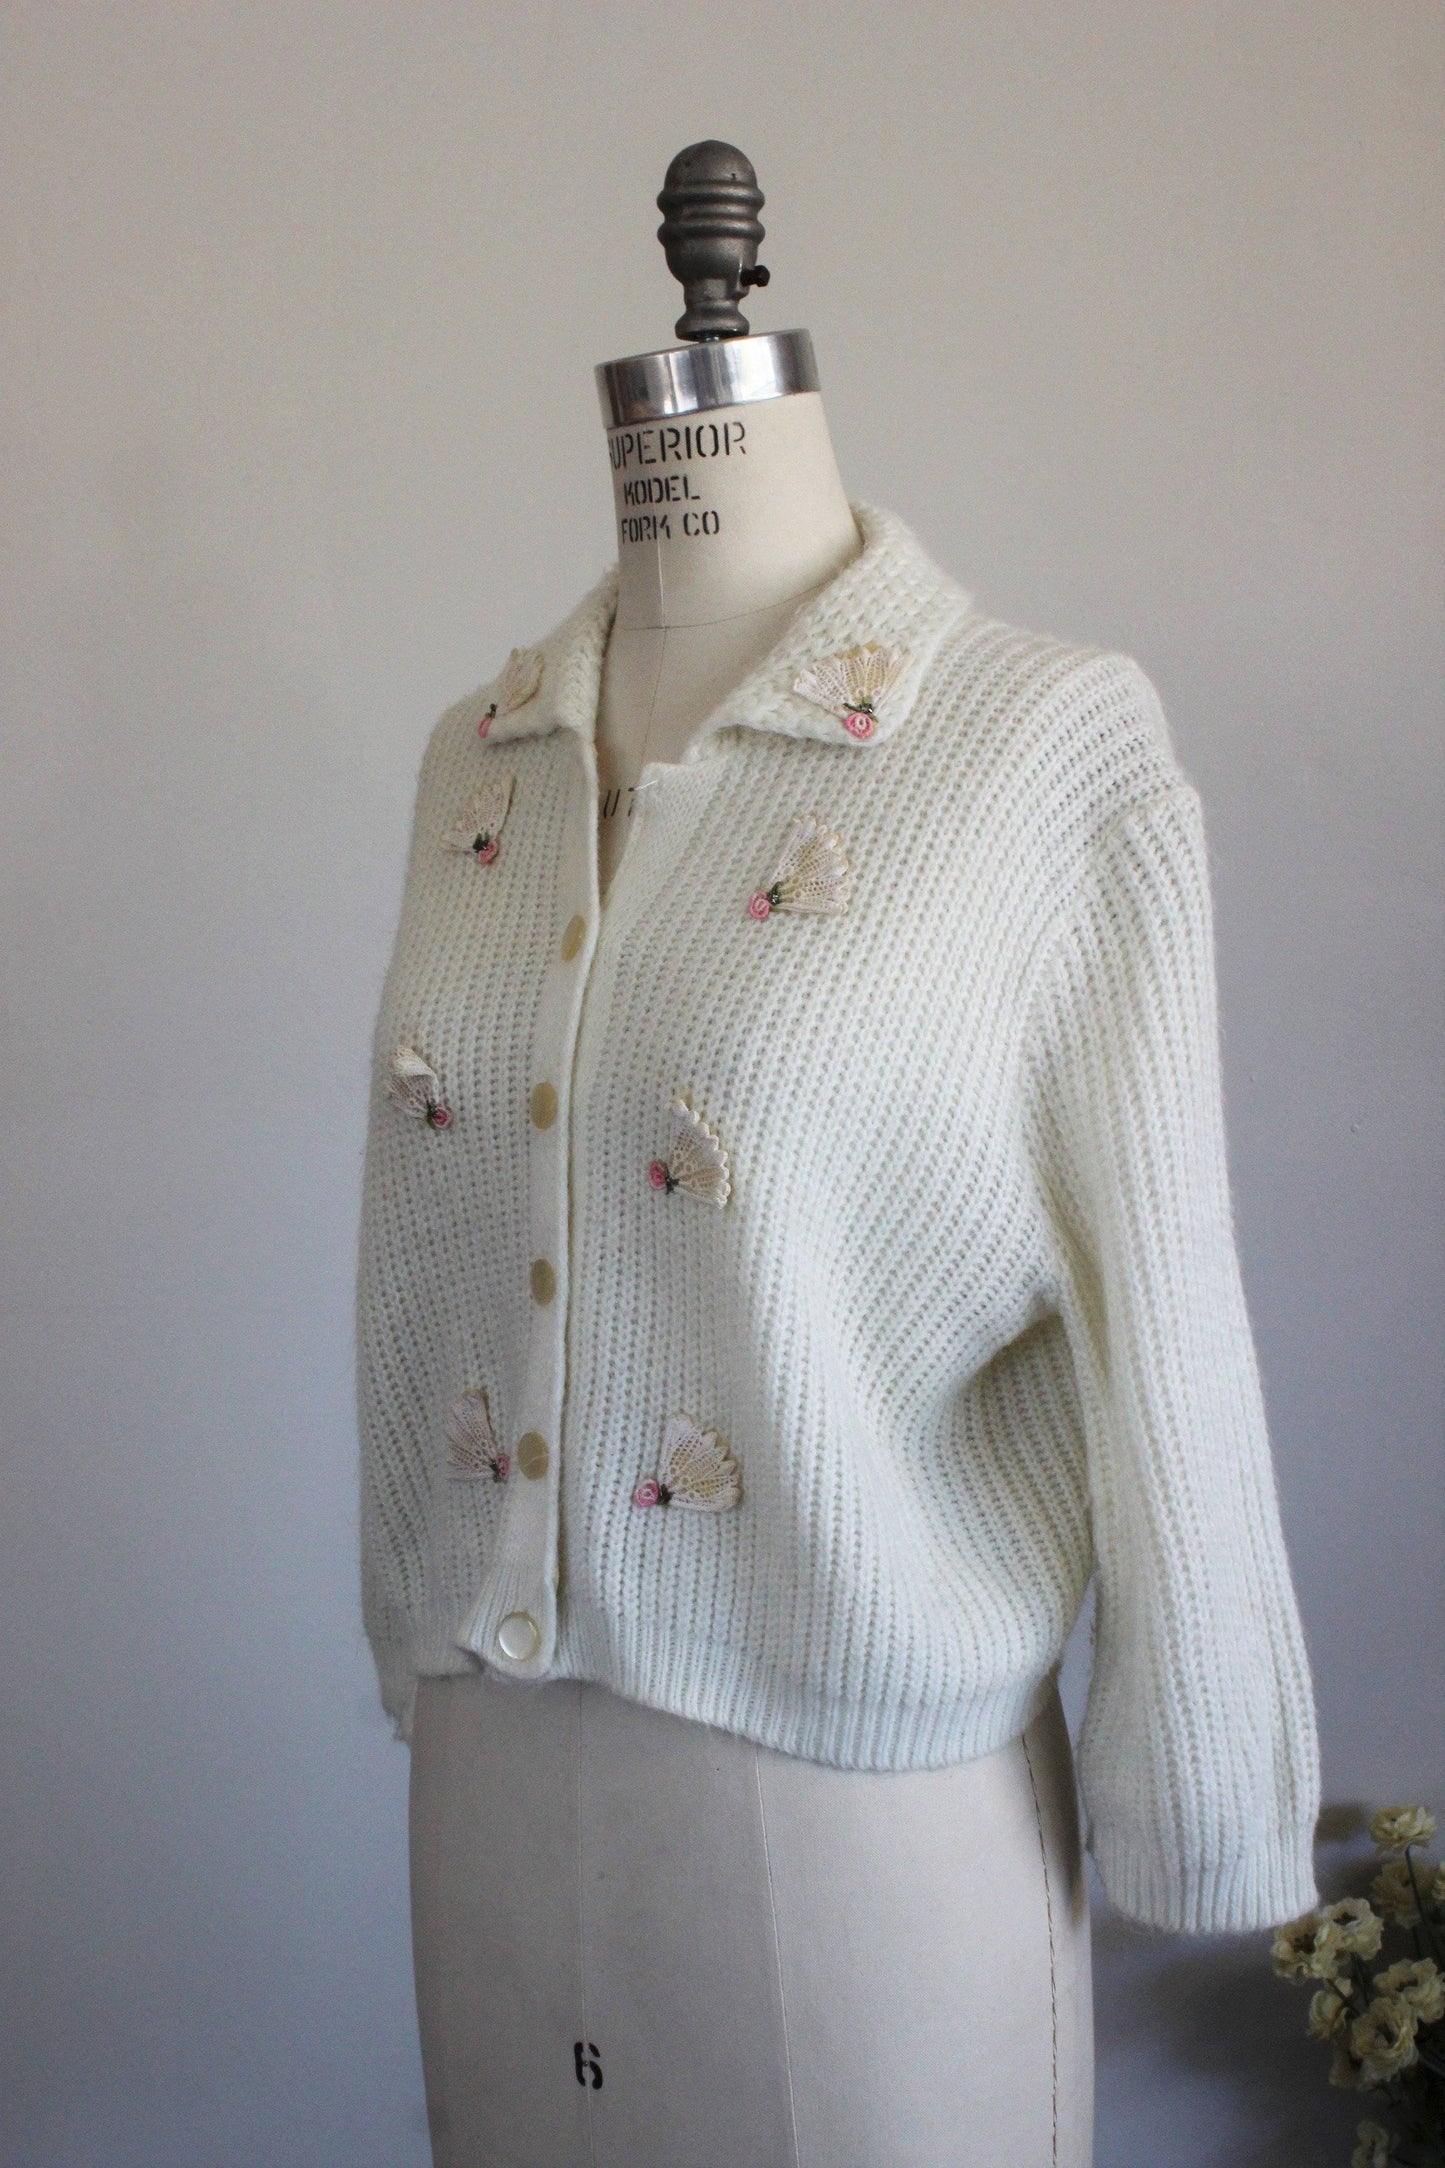 Vintage 1950s Off White Cardigan Sweater, with Fan Appliques-Toadstool Farm Vintage-1950s Sweater,50s Cardian,Appliques,Autumn Sweater,Fall Sweater,Vintage,Vintage Clothing,White Sweater